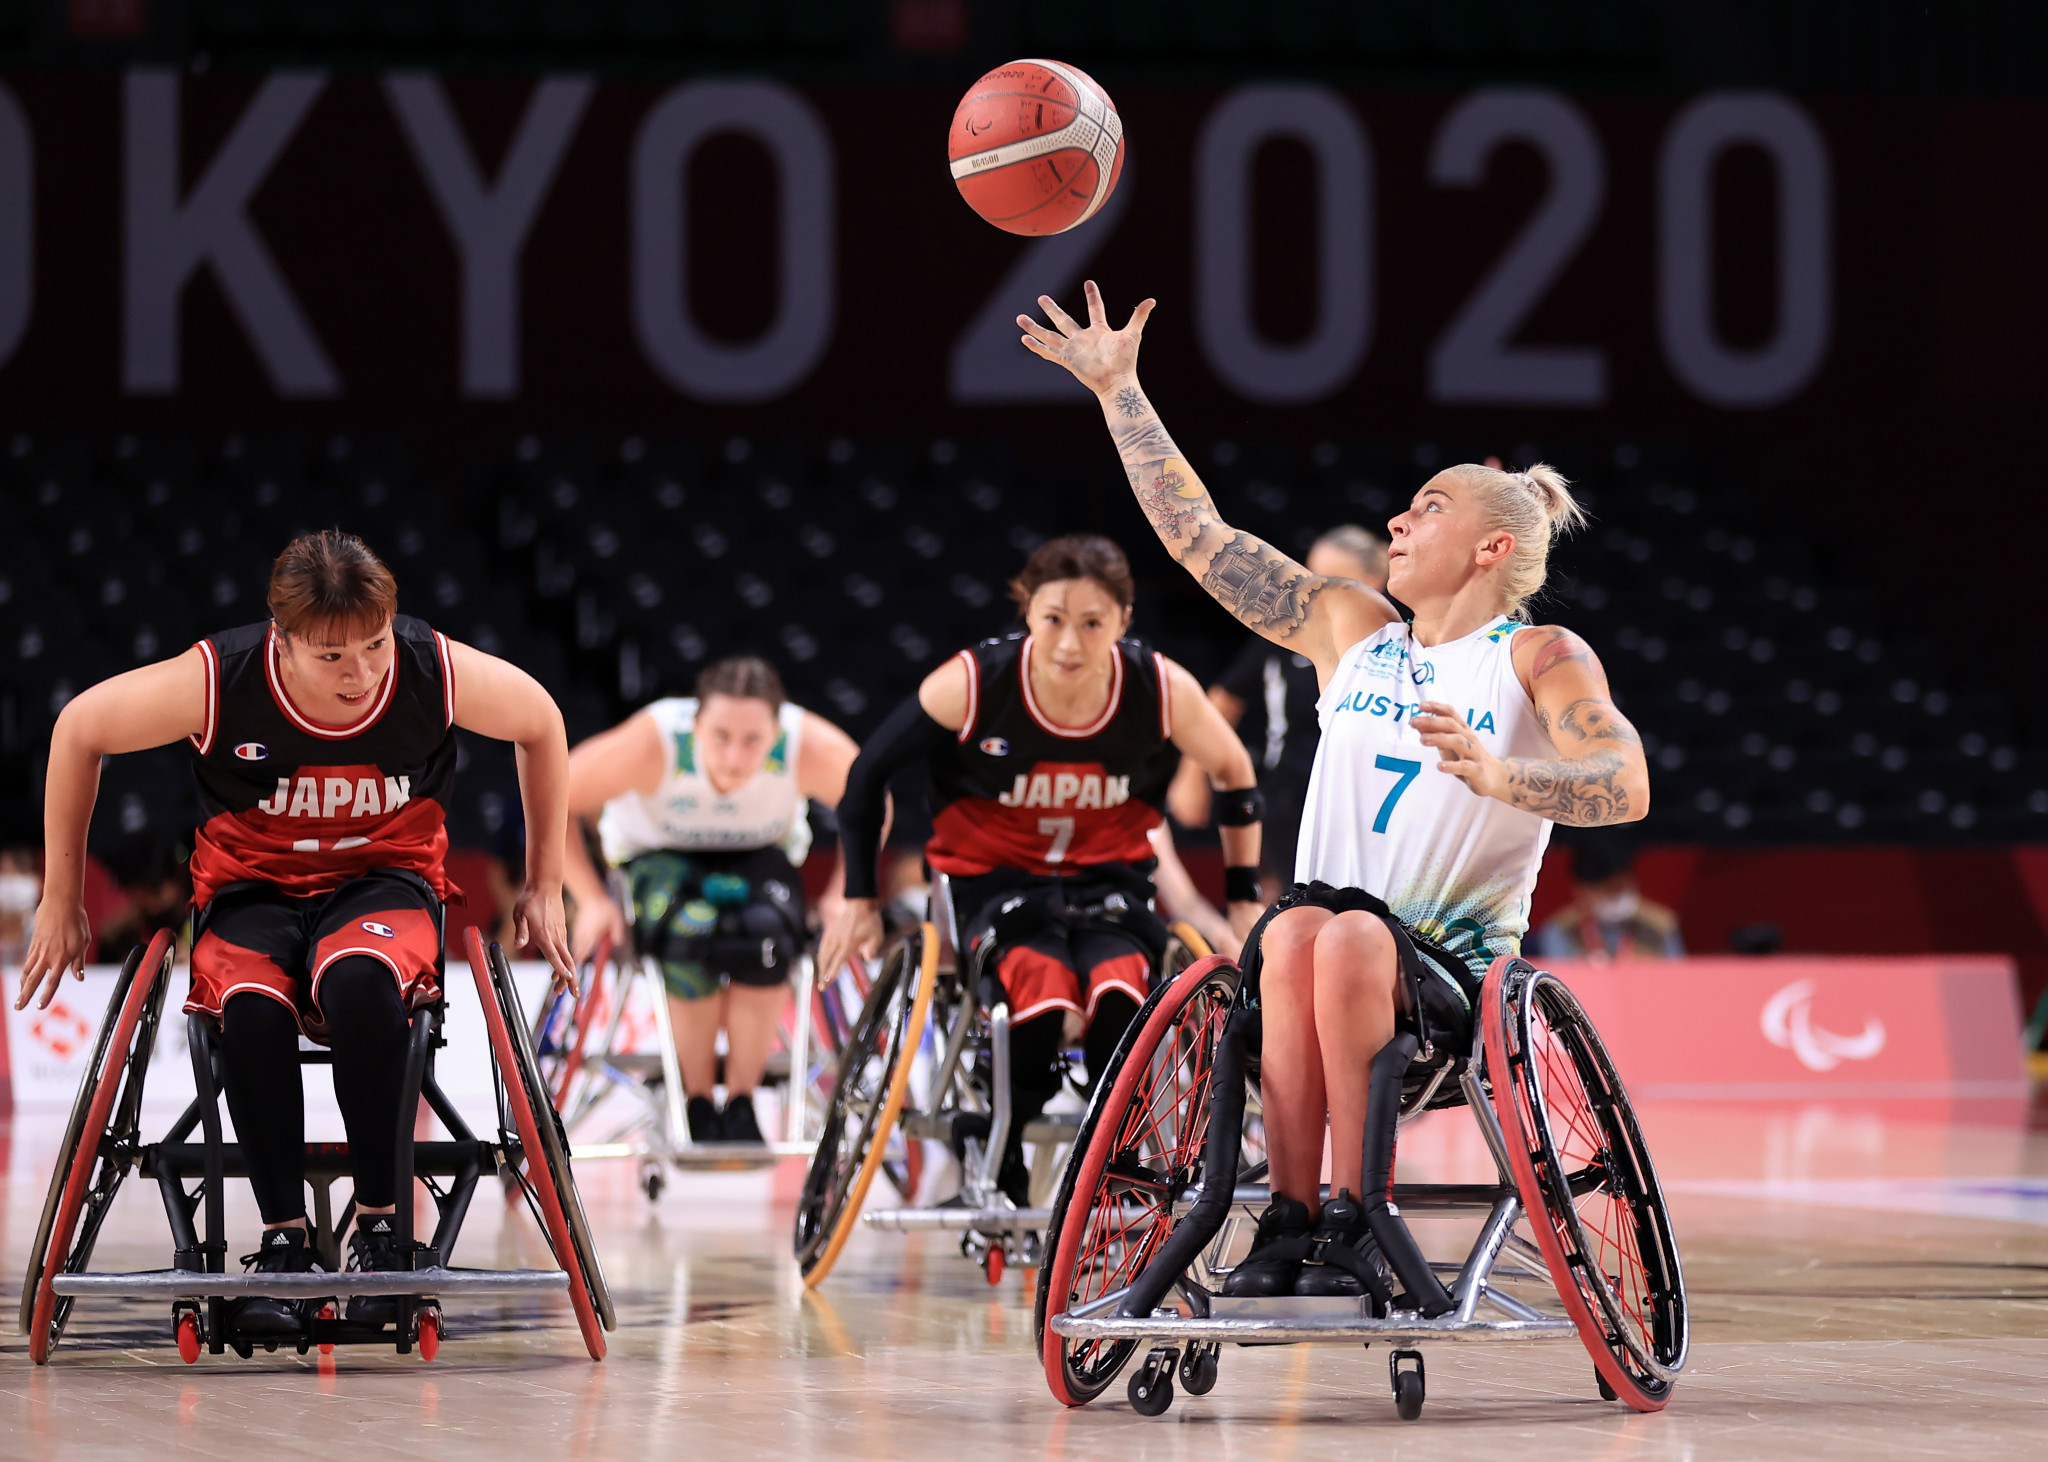 Australia are due to face Japan in a winner-takes-all match in the women's tournament at the IWBF Asia Oceania Championships ©Getty Images